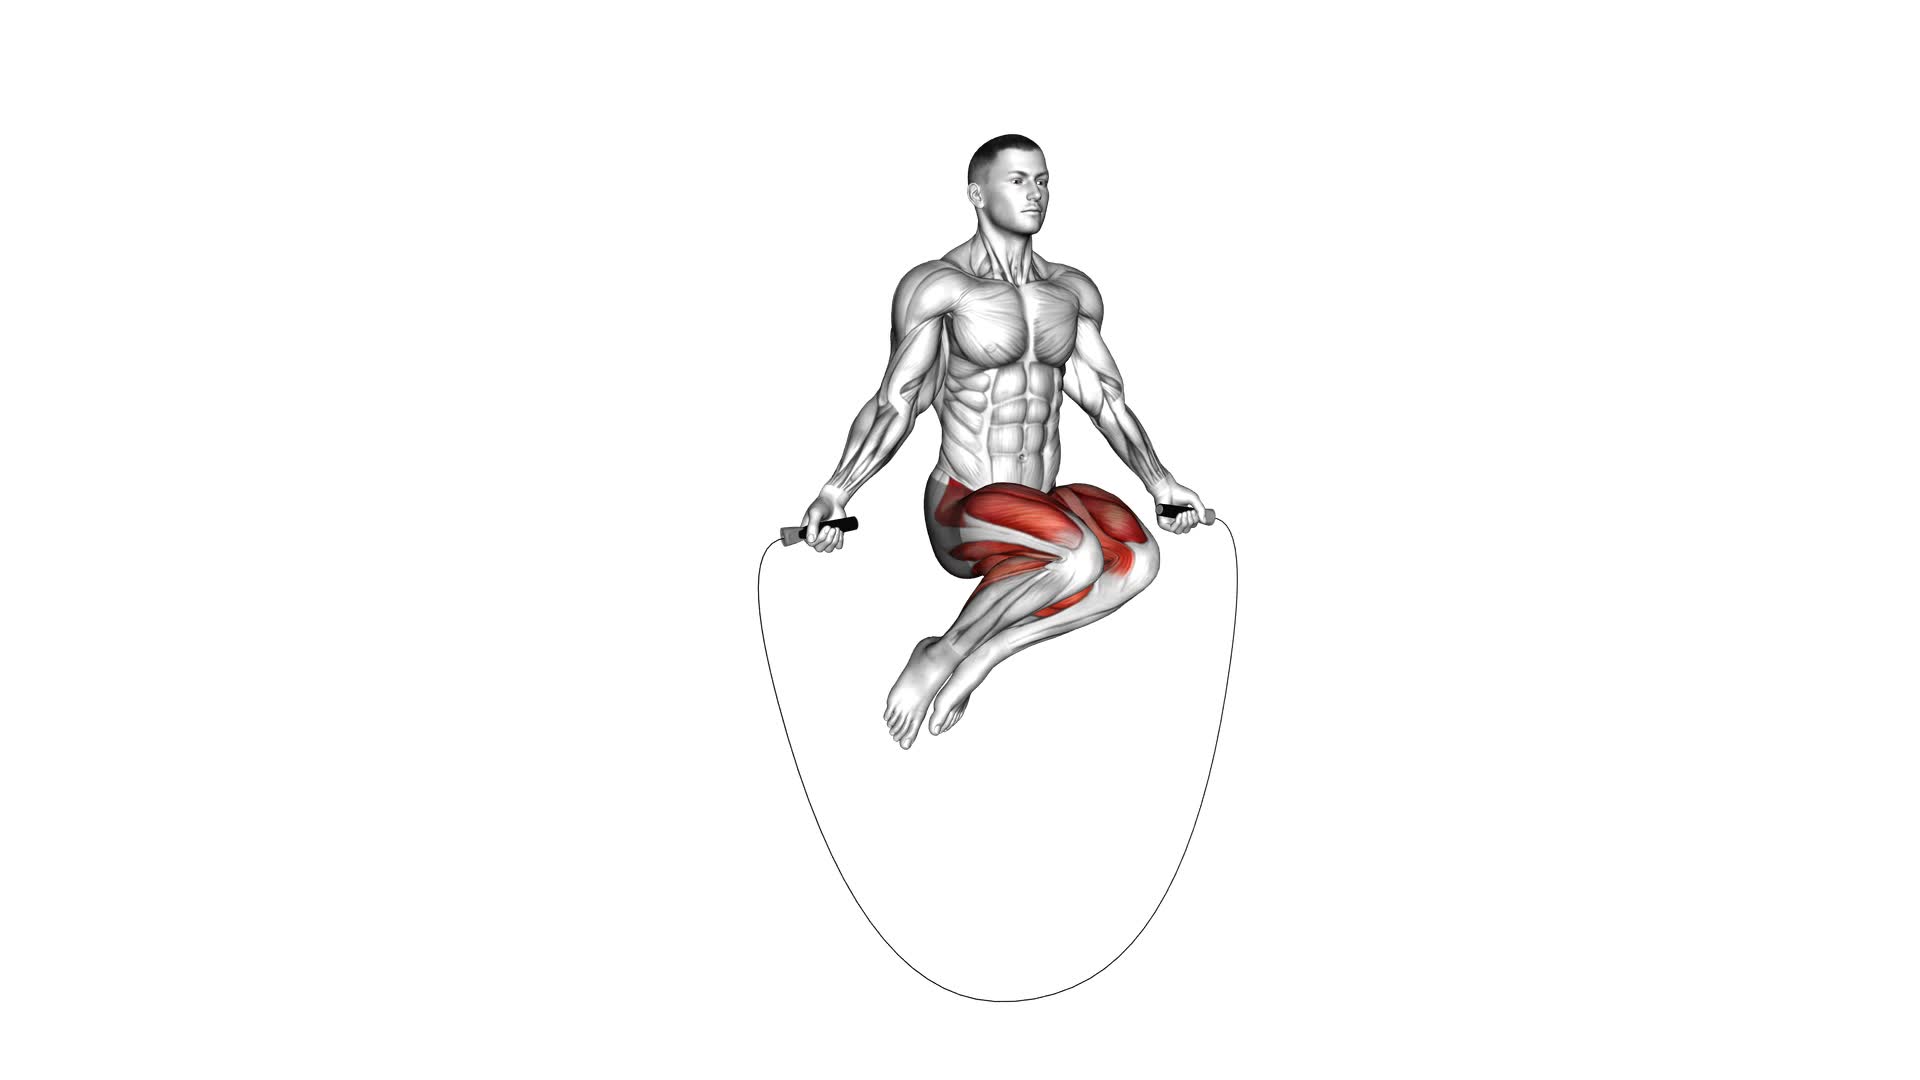 High Jump Rope (male) - Video Exercise Guide & Tips